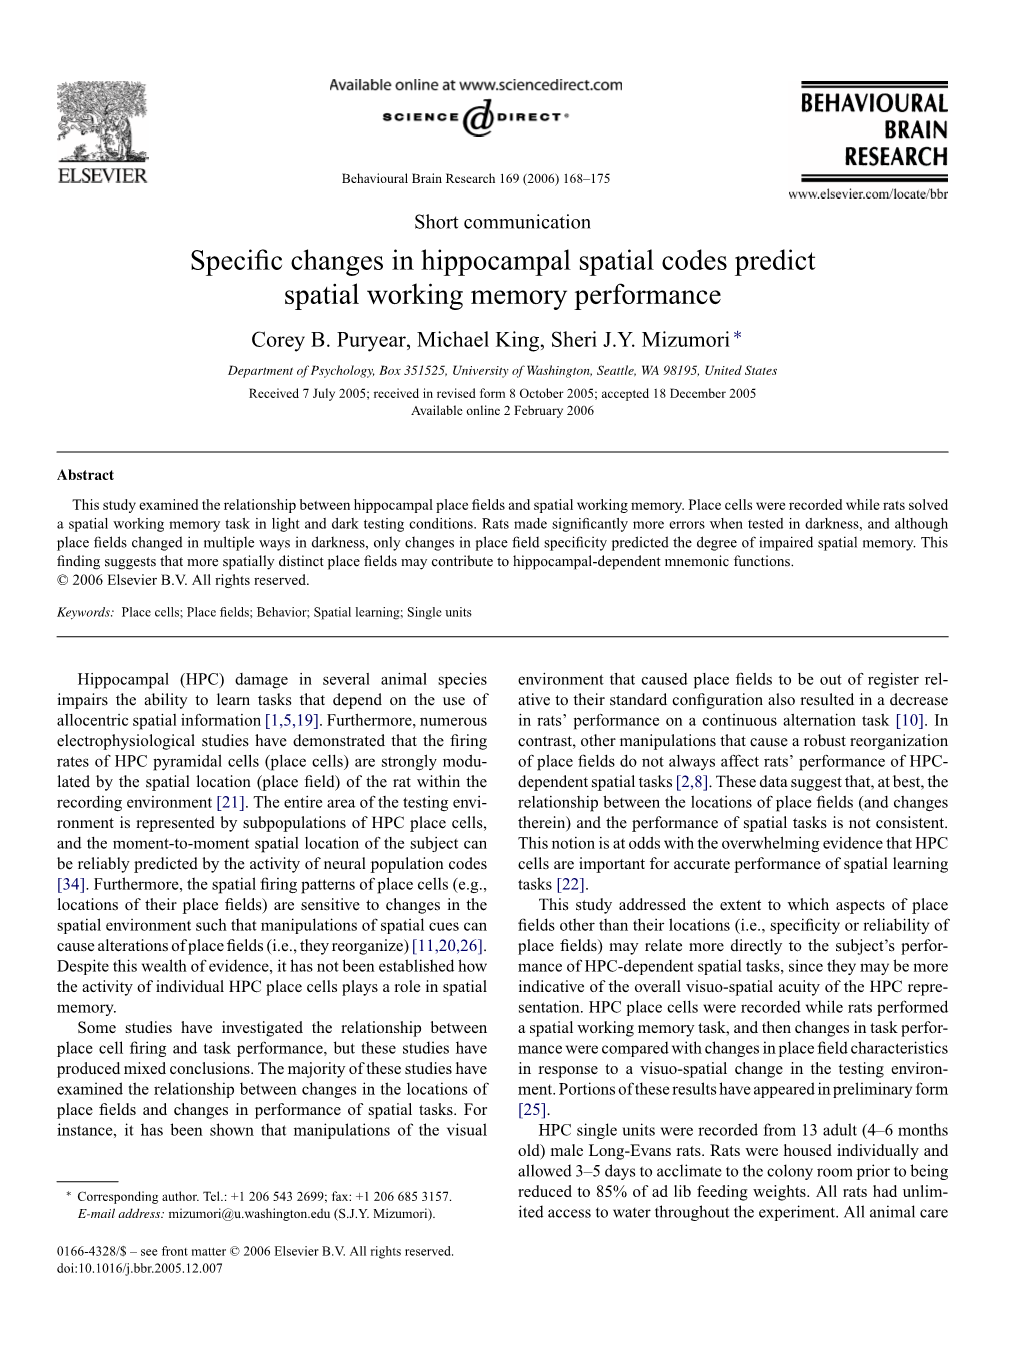 Specific Changes in Hippocampal Spatial Codes Predict Spatial